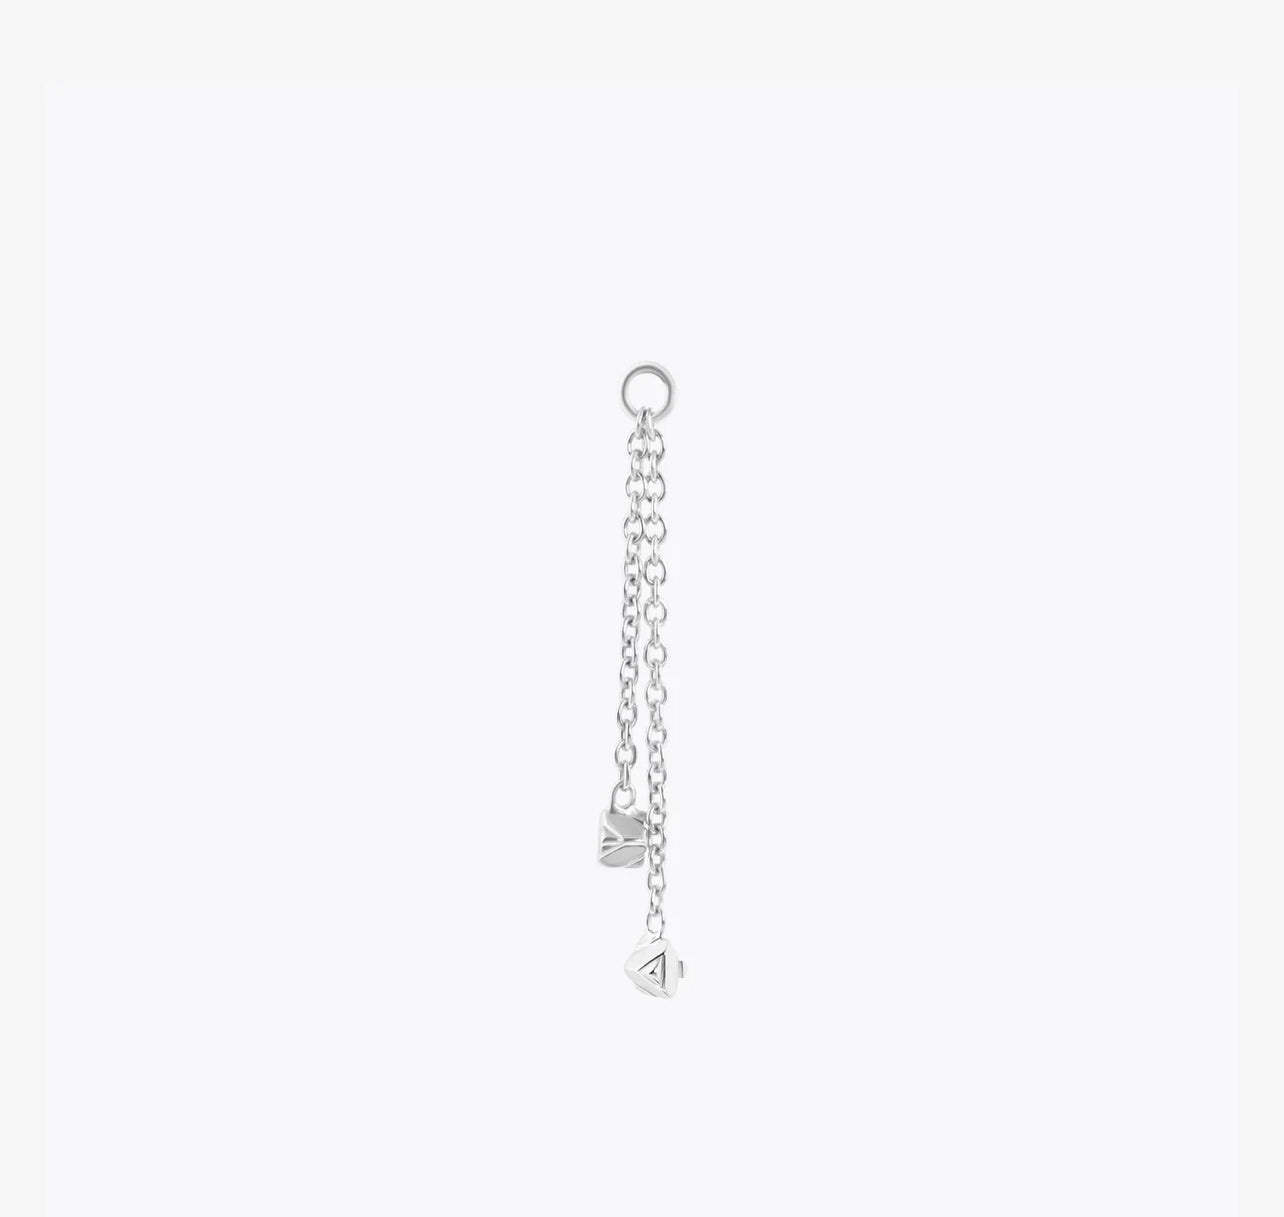 TETHER - EZRA - 14KT SOLID GOLD - DOUBLE CHAIN + CHARM